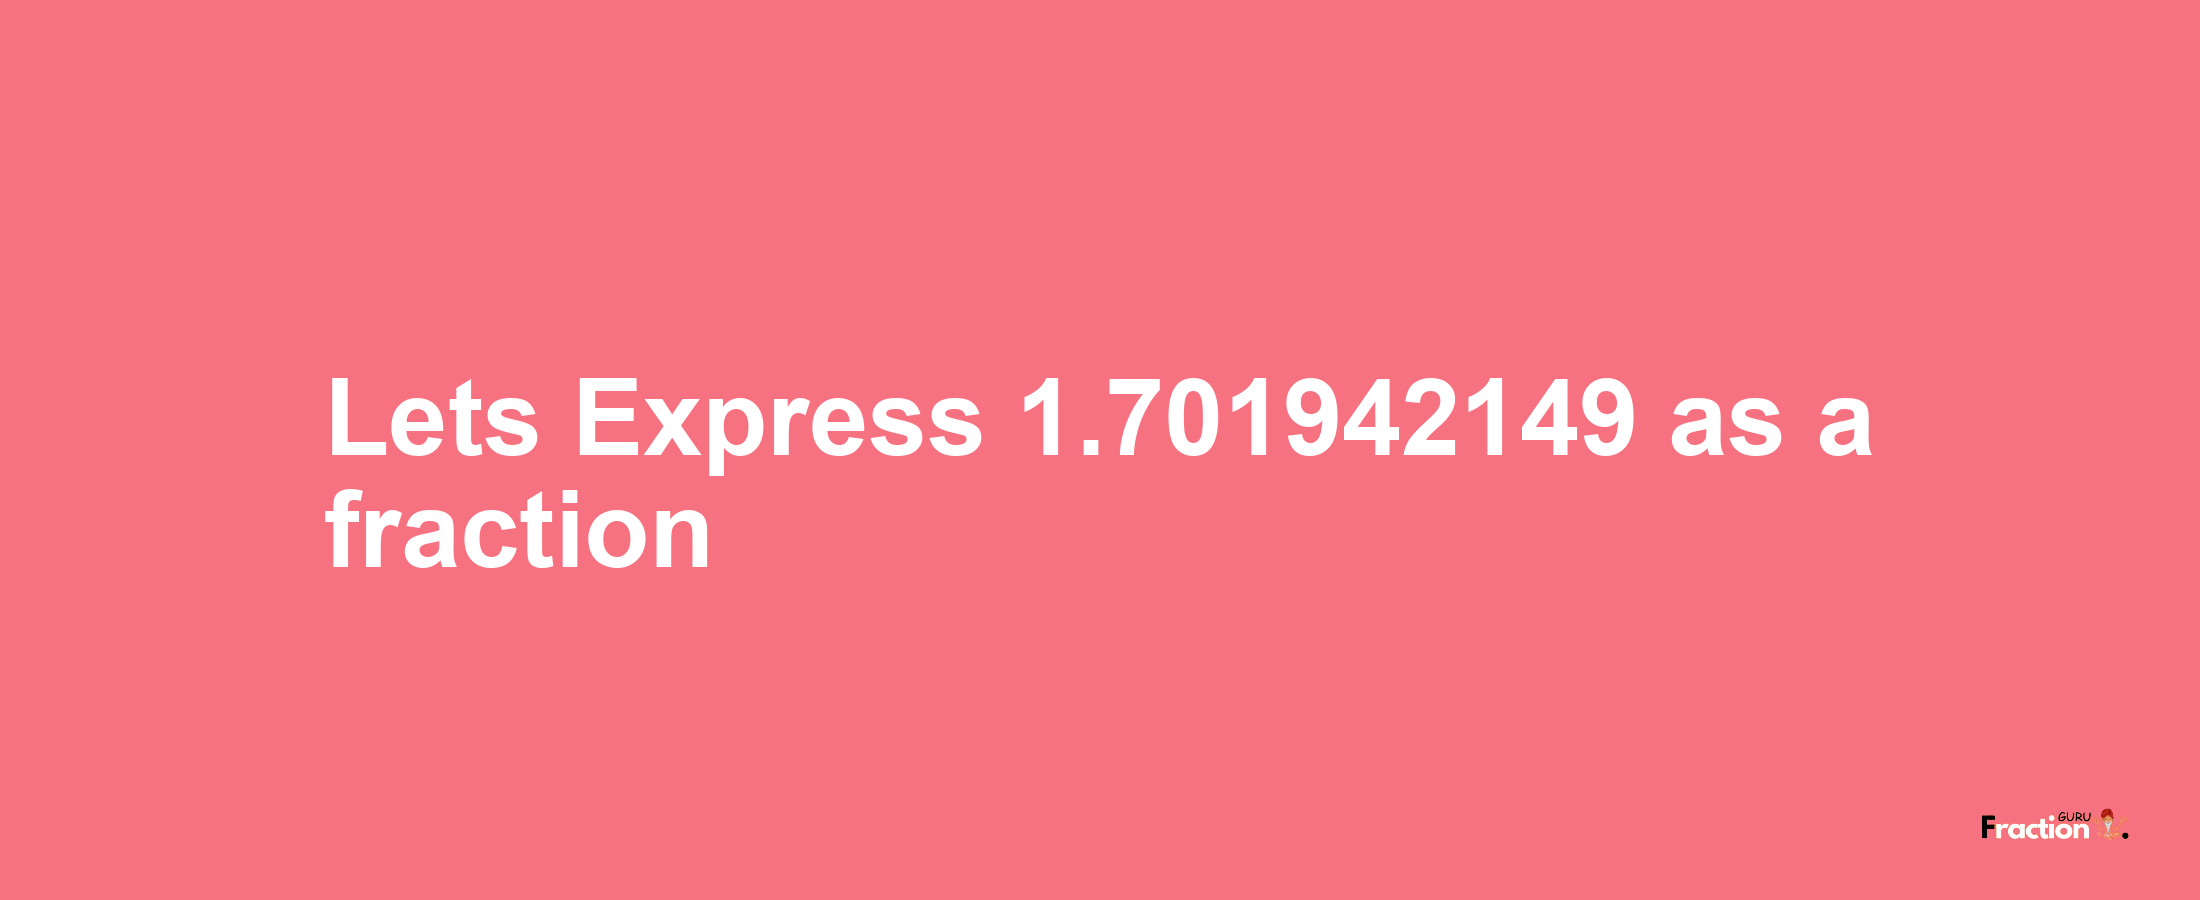 Lets Express 1.701942149 as afraction